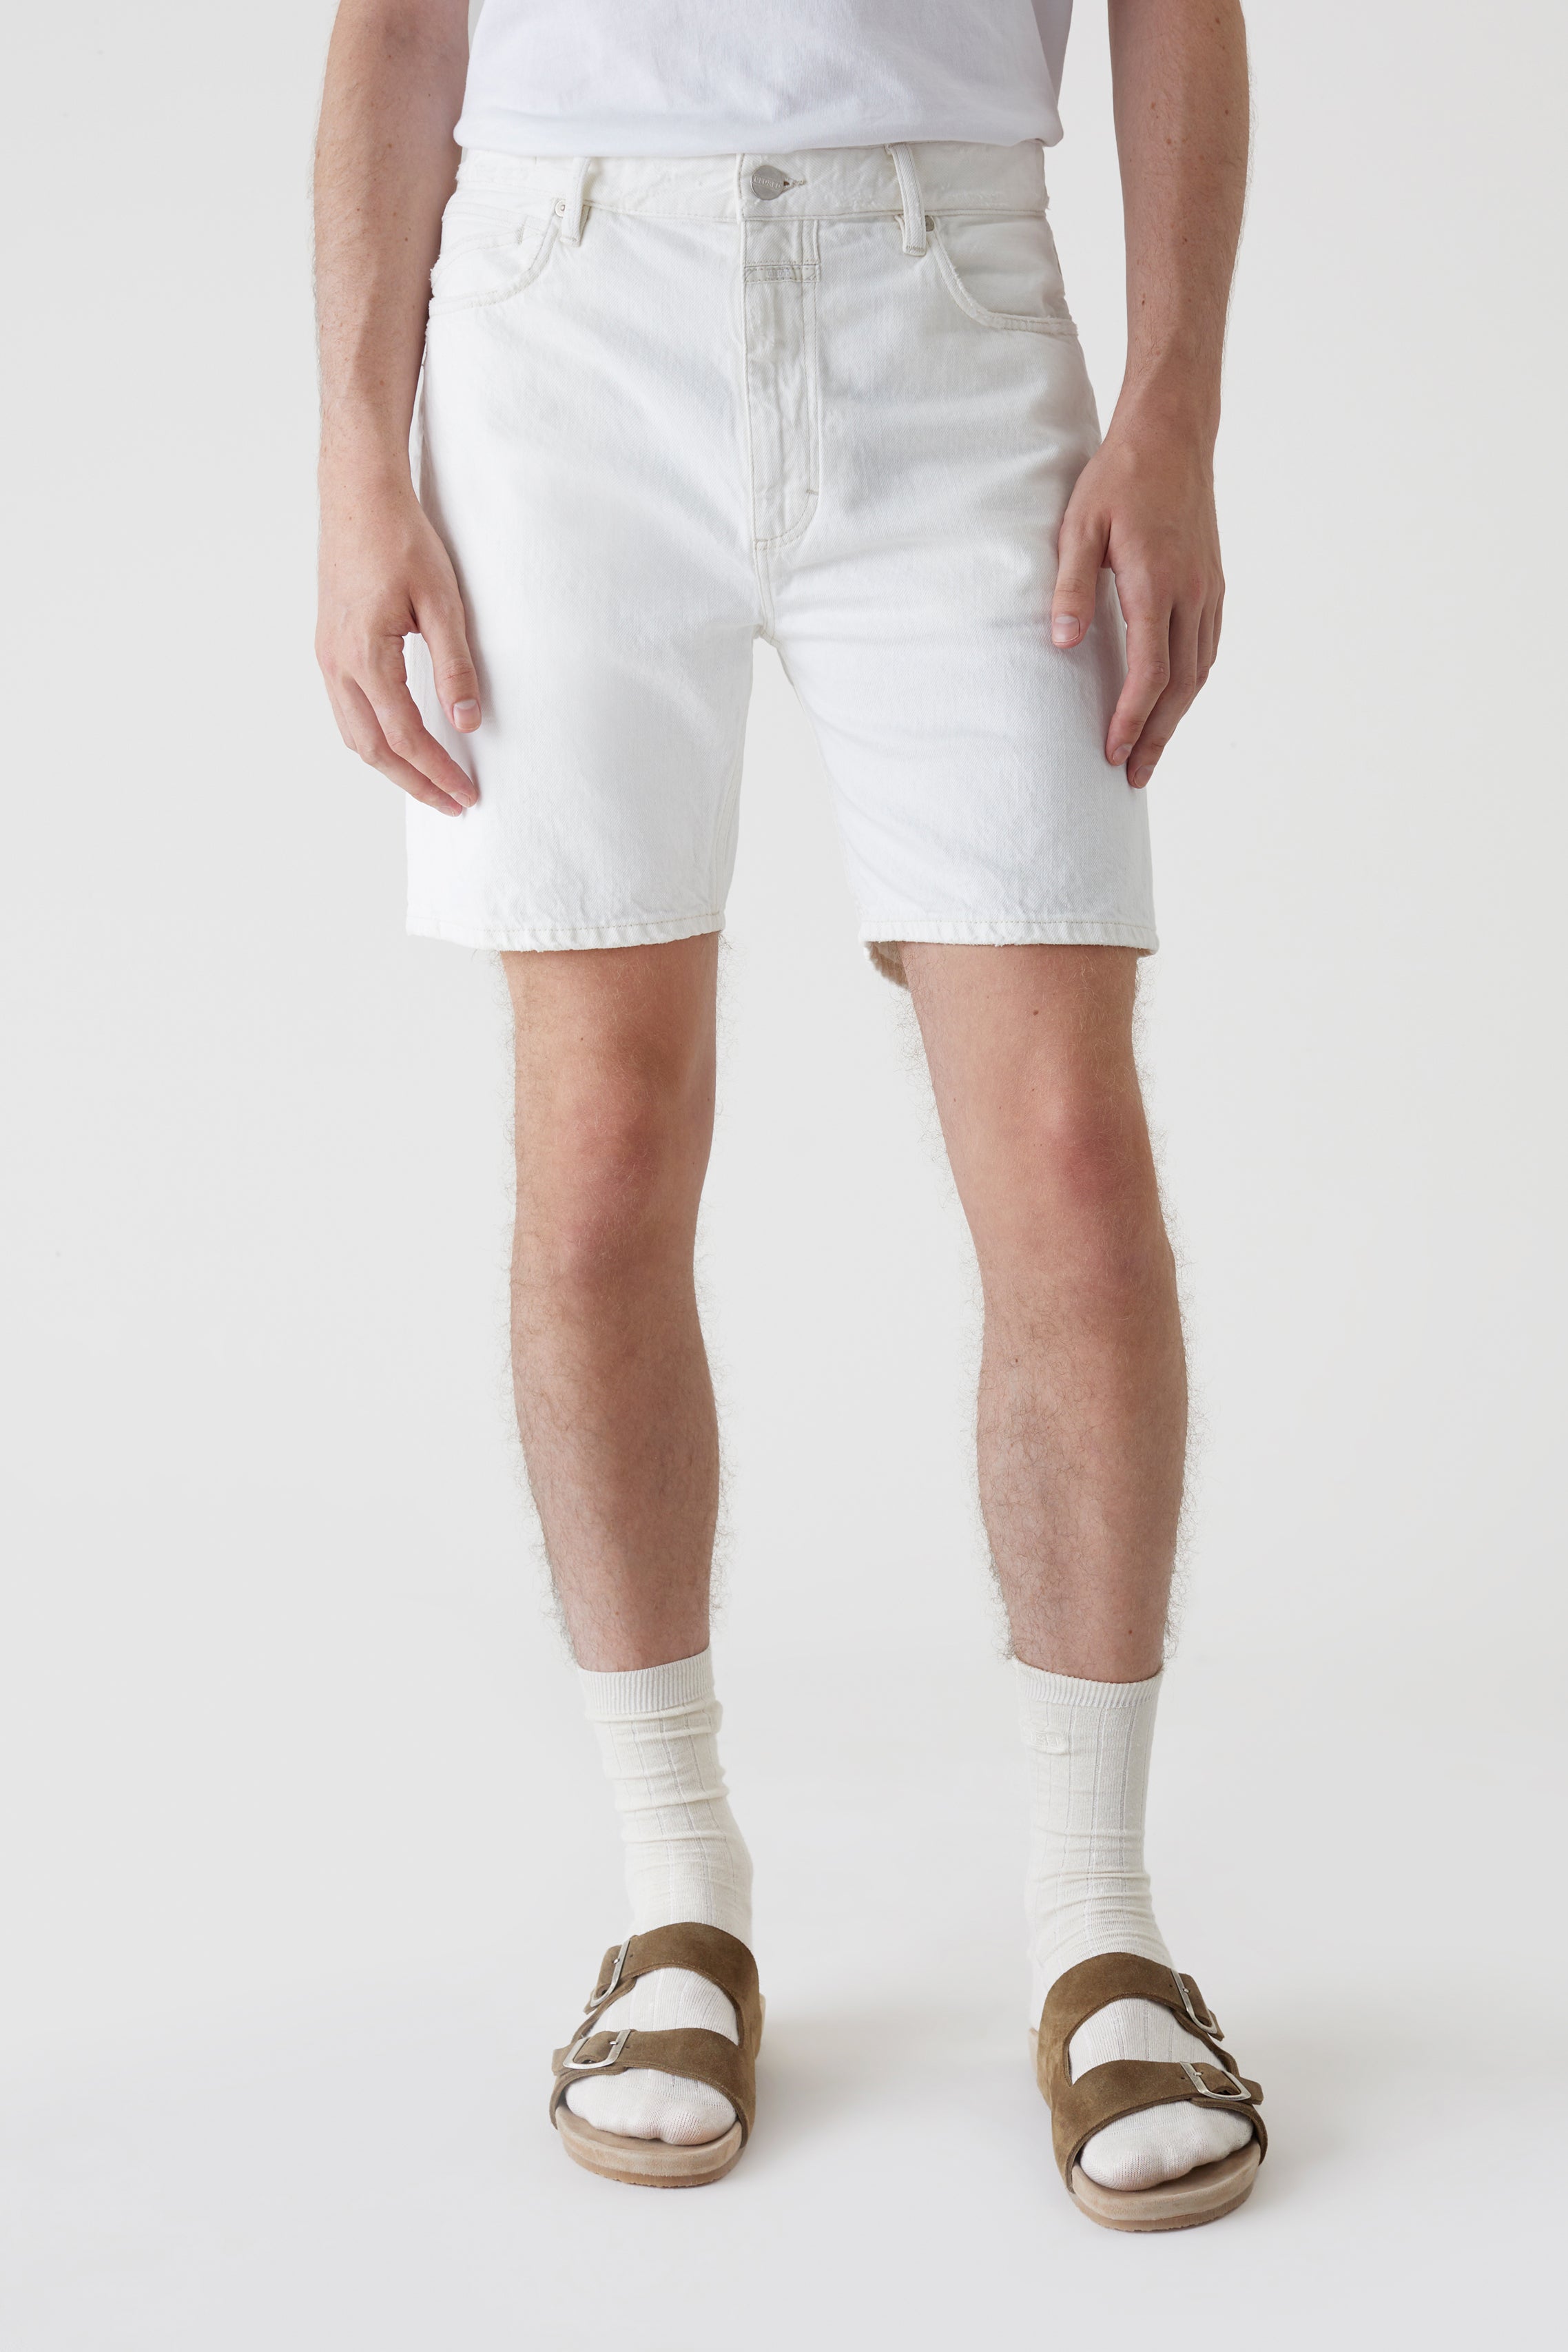 CLOSED-OUTLET-SALE-STYLE-NAME-BOGUS-SHORTS-Hosen-ARCHIVE-COLLECTION-2.jpg